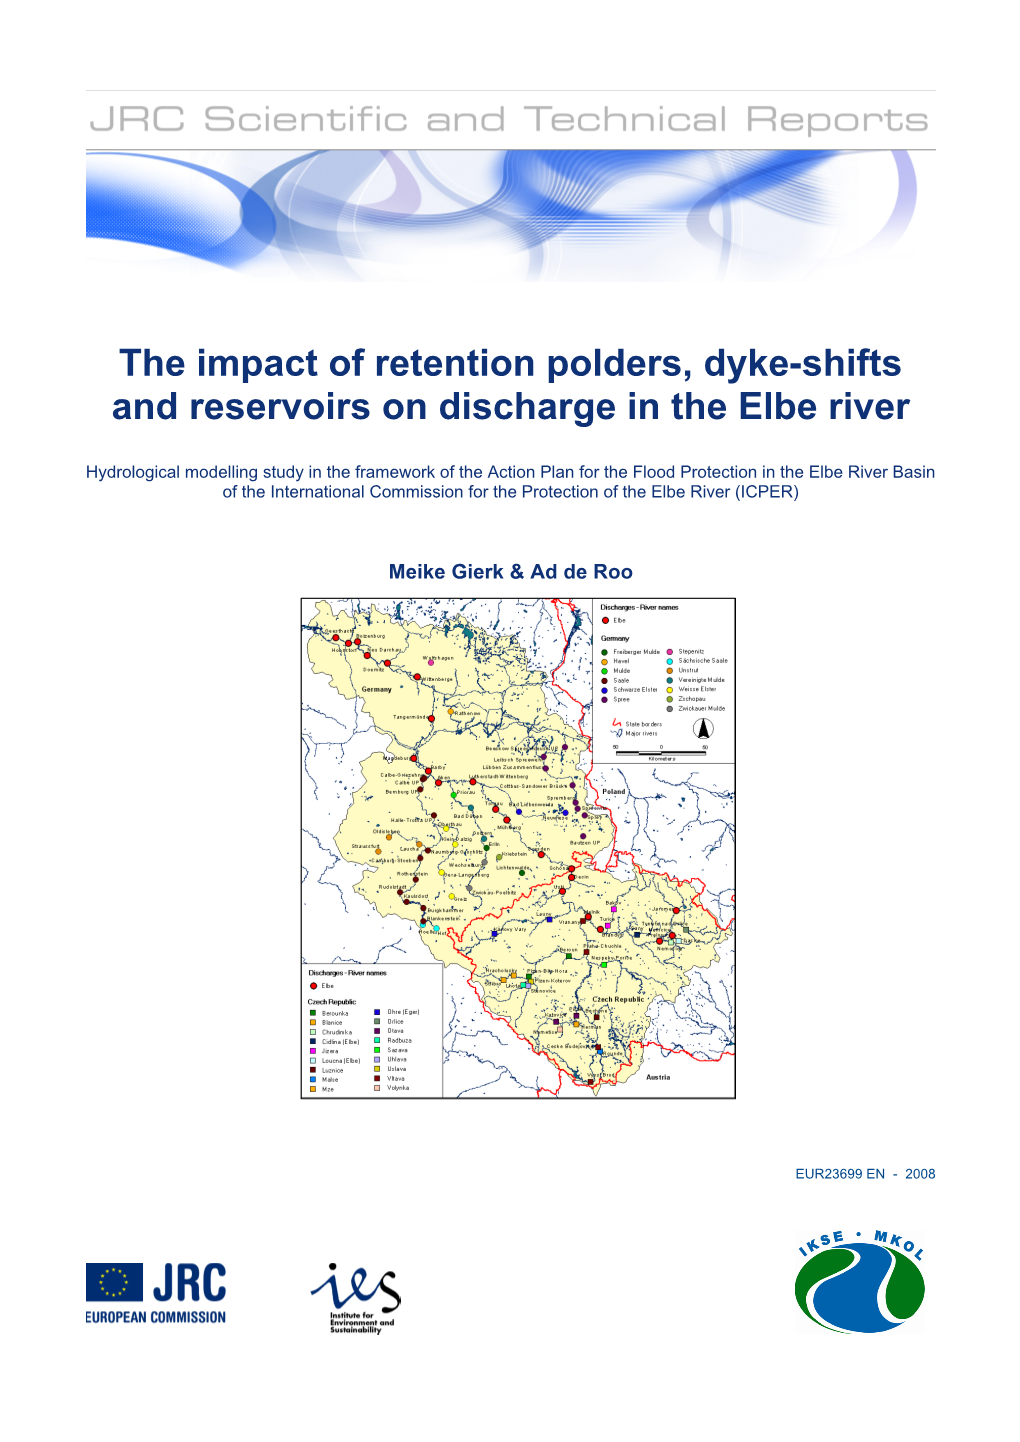 The Impact of Retention Polders, Dyke-Shifts and Reservoirs on Discharge in the Elbe River